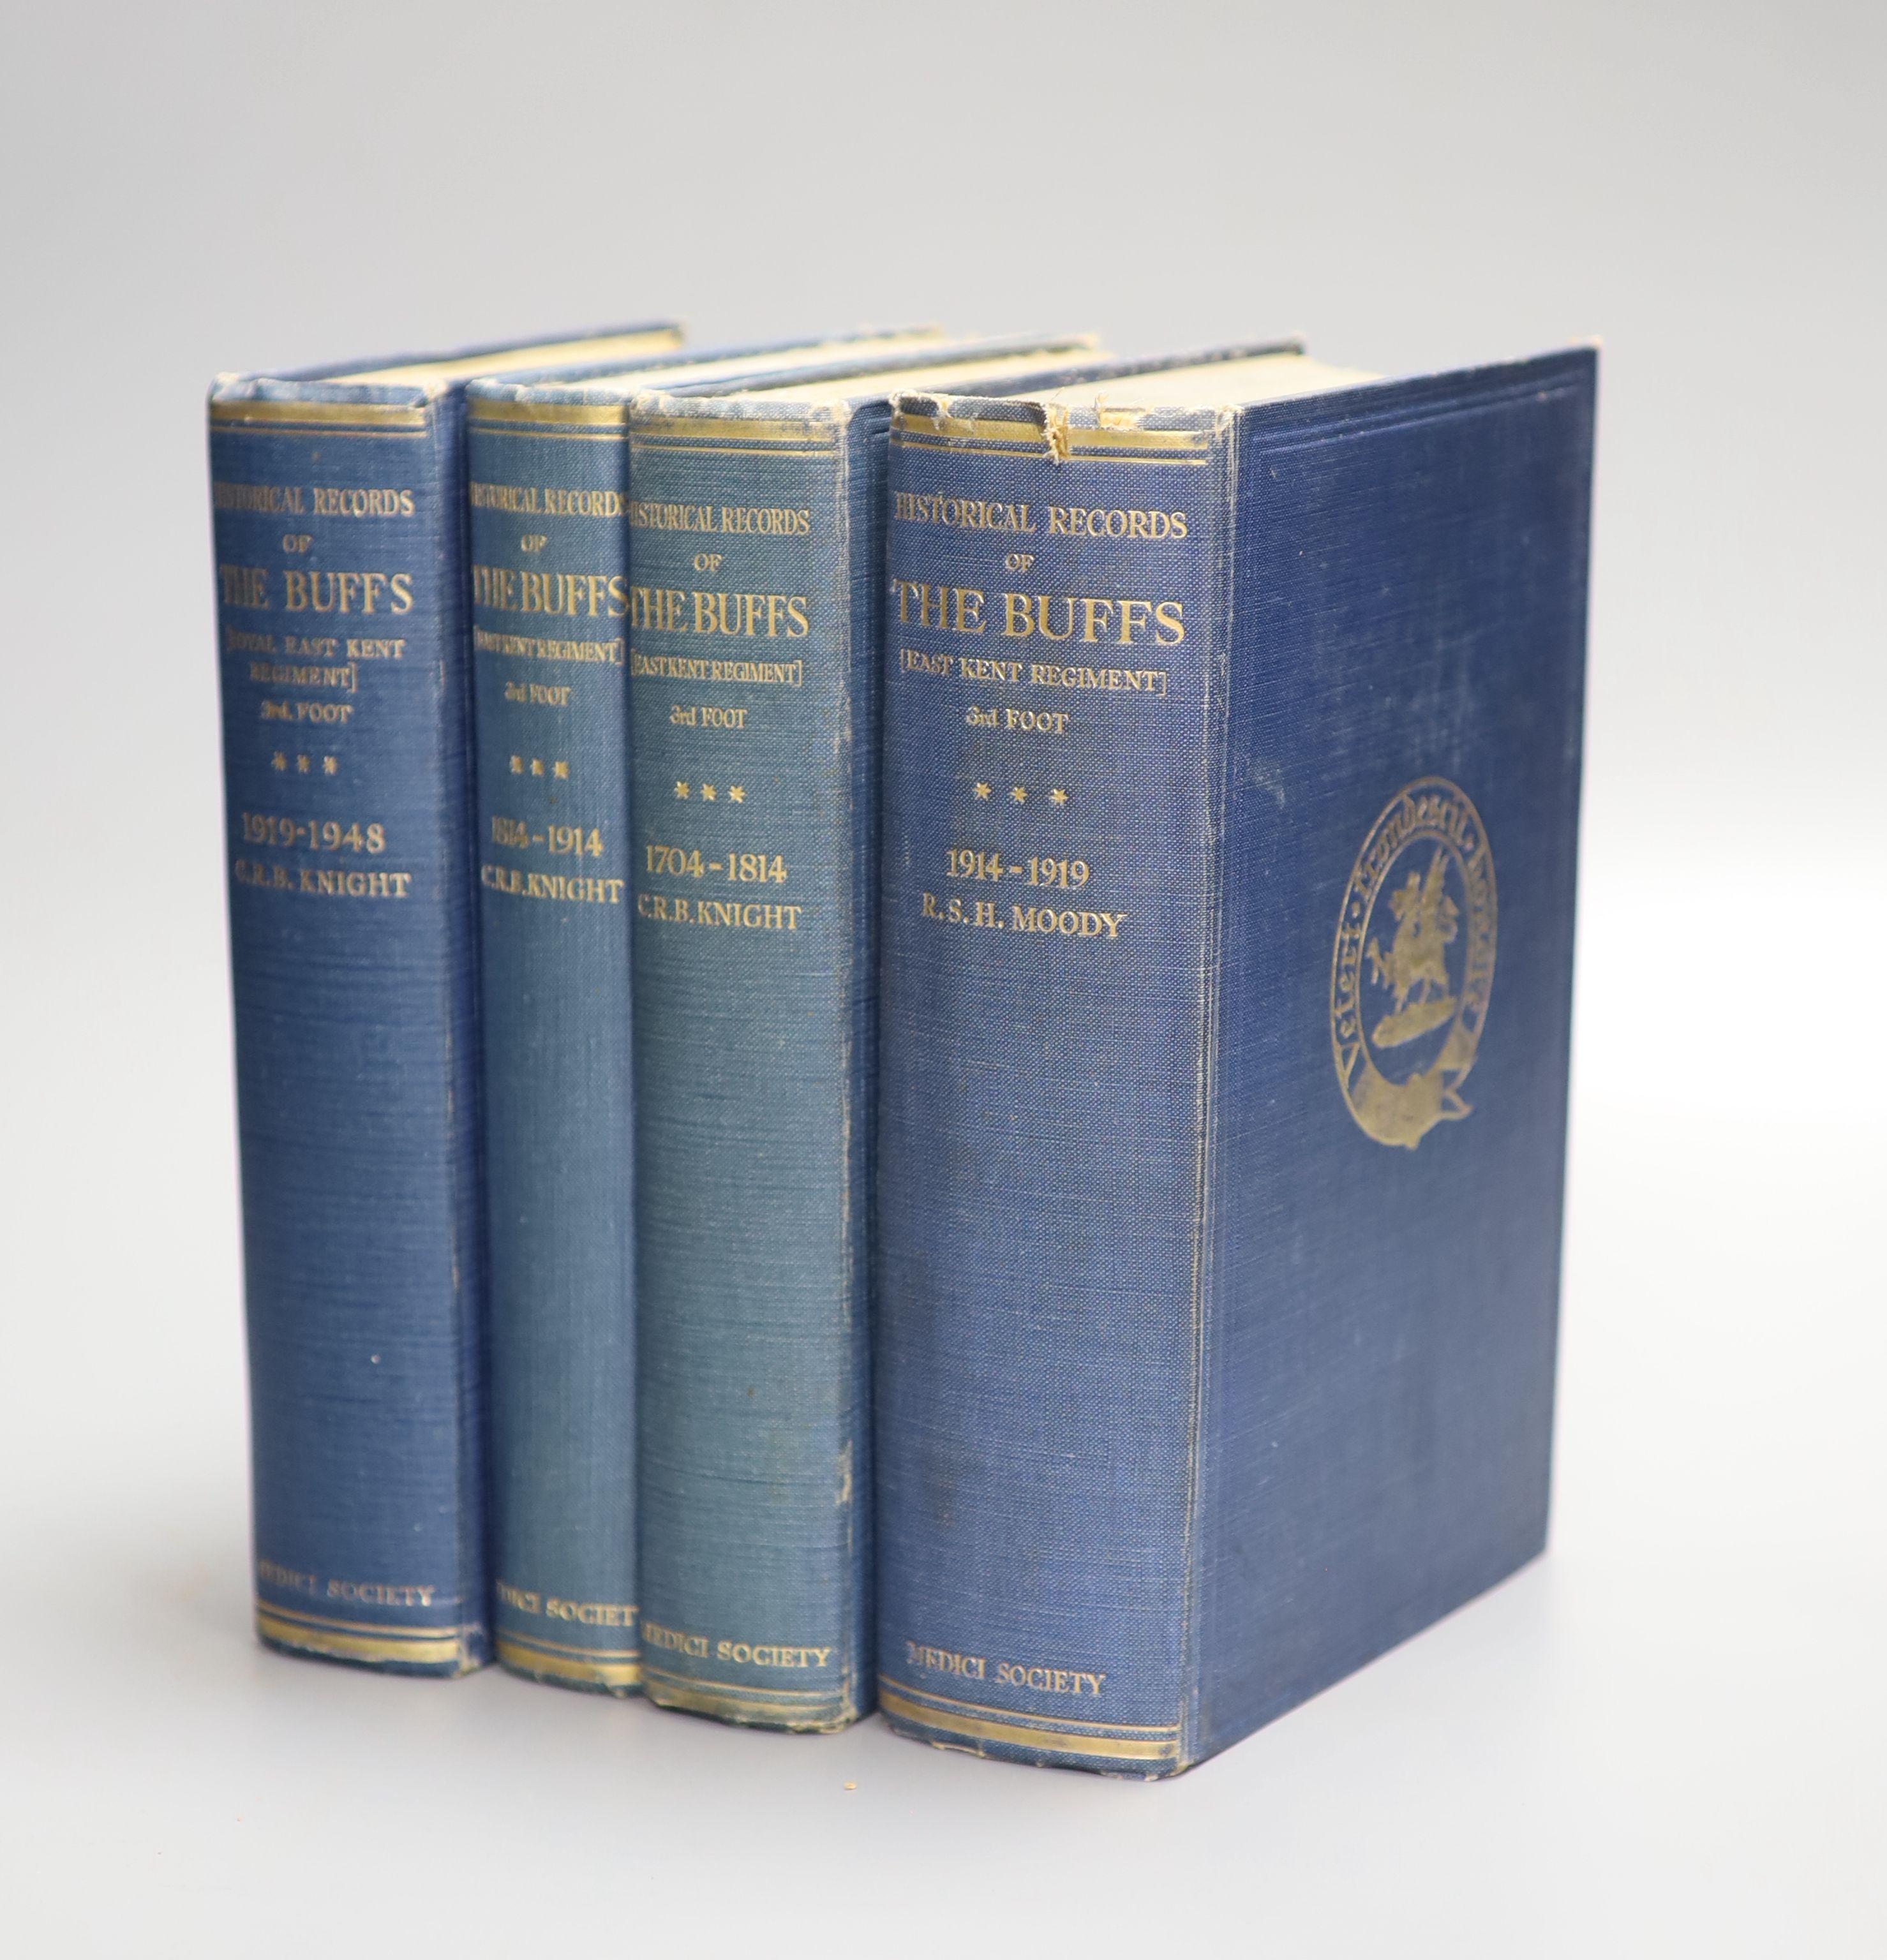 Knight, C.R.B and Moody, R.S.H - Historical Record of the Buffs, East Kent Regiment, 3rd Foot, 3 vols, (1704-1814, 1814-1914, and 1919-1948) qto, blue cloth gilt, London, 1935-51 and Moody, R.S.H (1914-1919), London, 192